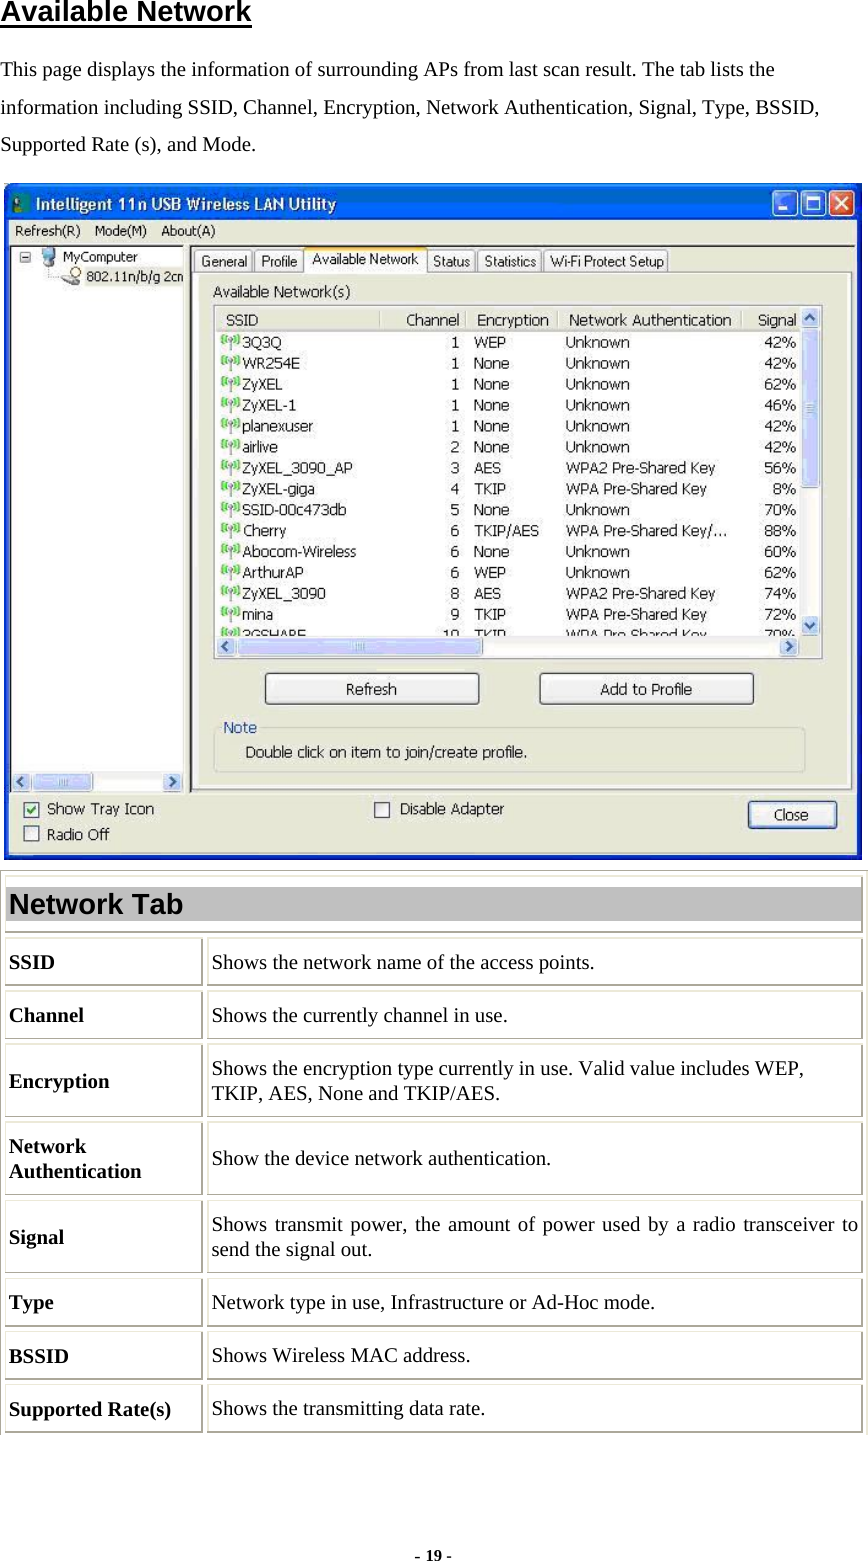  - 19 - Available Network This page displays the information of surrounding APs from last scan result. The tab lists the information including SSID, Channel, Encryption, Network Authentication, Signal, Type, BSSID, Supported Rate (s), and Mode.  Network Tab SSID  Shows the network name of the access points. Channel  Shows the currently channel in use. Encryption  Shows the encryption type currently in use. Valid value includes WEP, TKIP, AES, None and TKIP/AES. Network Authentication  Show the device network authentication. Signal  Shows transmit power, the amount of power used by a radio transceiver to send the signal out. Type Network type in use, Infrastructure or Ad-Hoc mode. BSSID  Shows Wireless MAC address. Supported Rate(s)  Shows the transmitting data rate. 